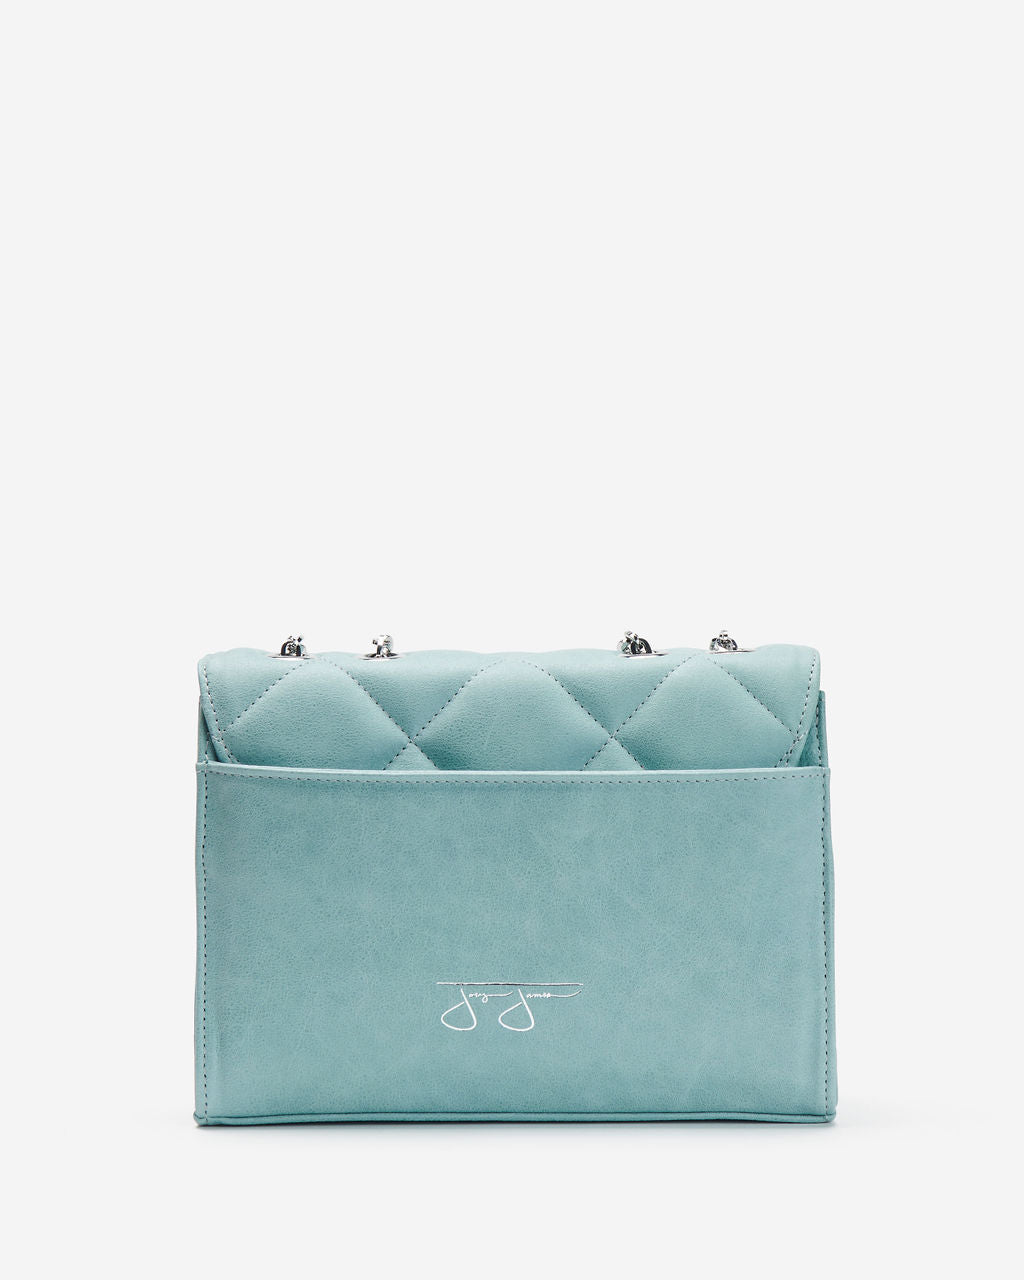 Kristy Bag - Turquoise  Joey James, The Label   